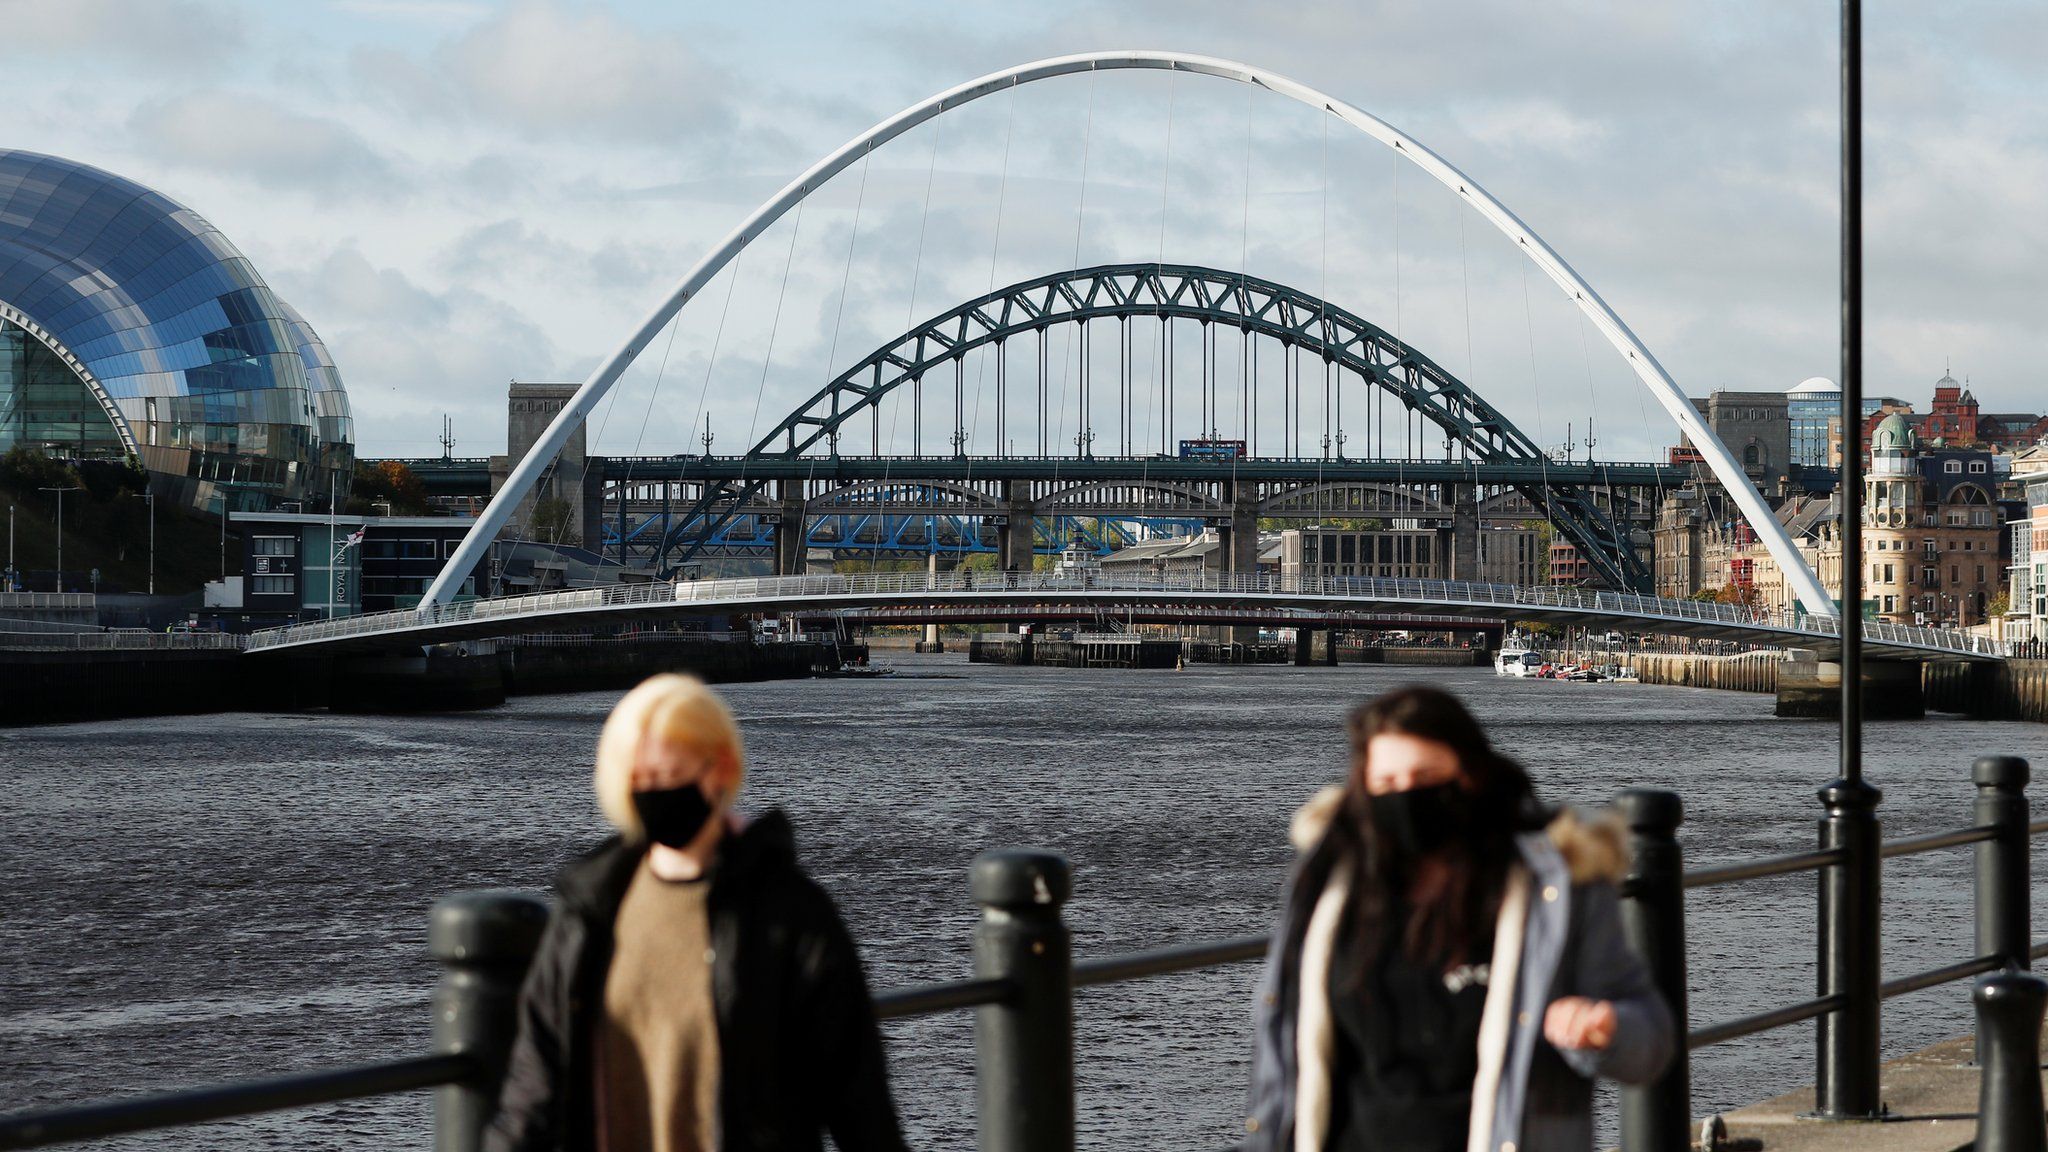 View of two women wearing masks with River Tyne bridges and the Sage Gateshead in the background